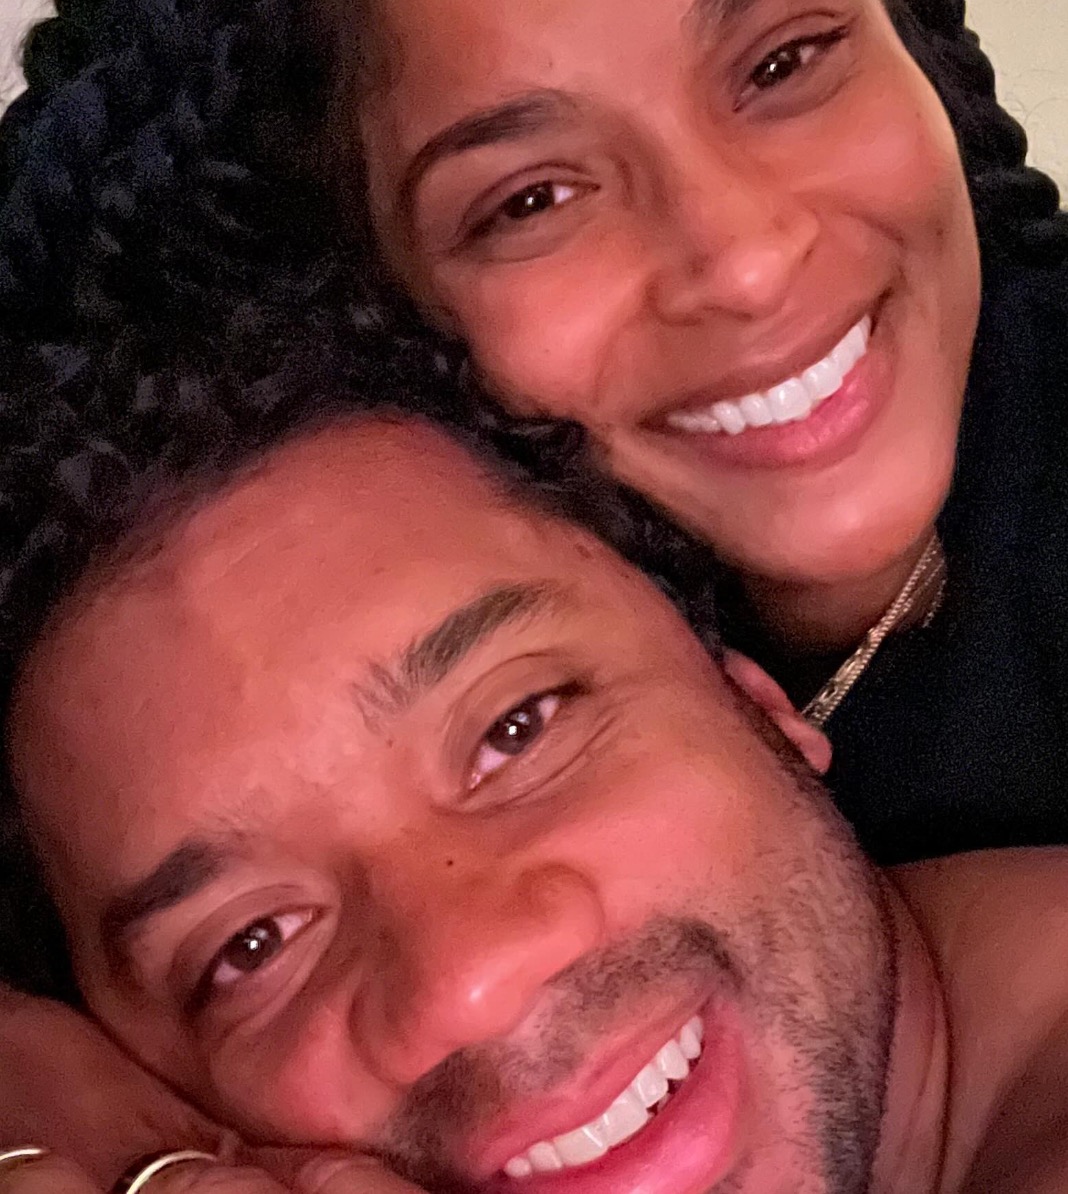 NFL Star Russell Wilson and Pop Star Ciara Make Big Announcement as Football Season Nears Its End | NFL quarterback Russell Wilson and pop star Ciara have some massive news!